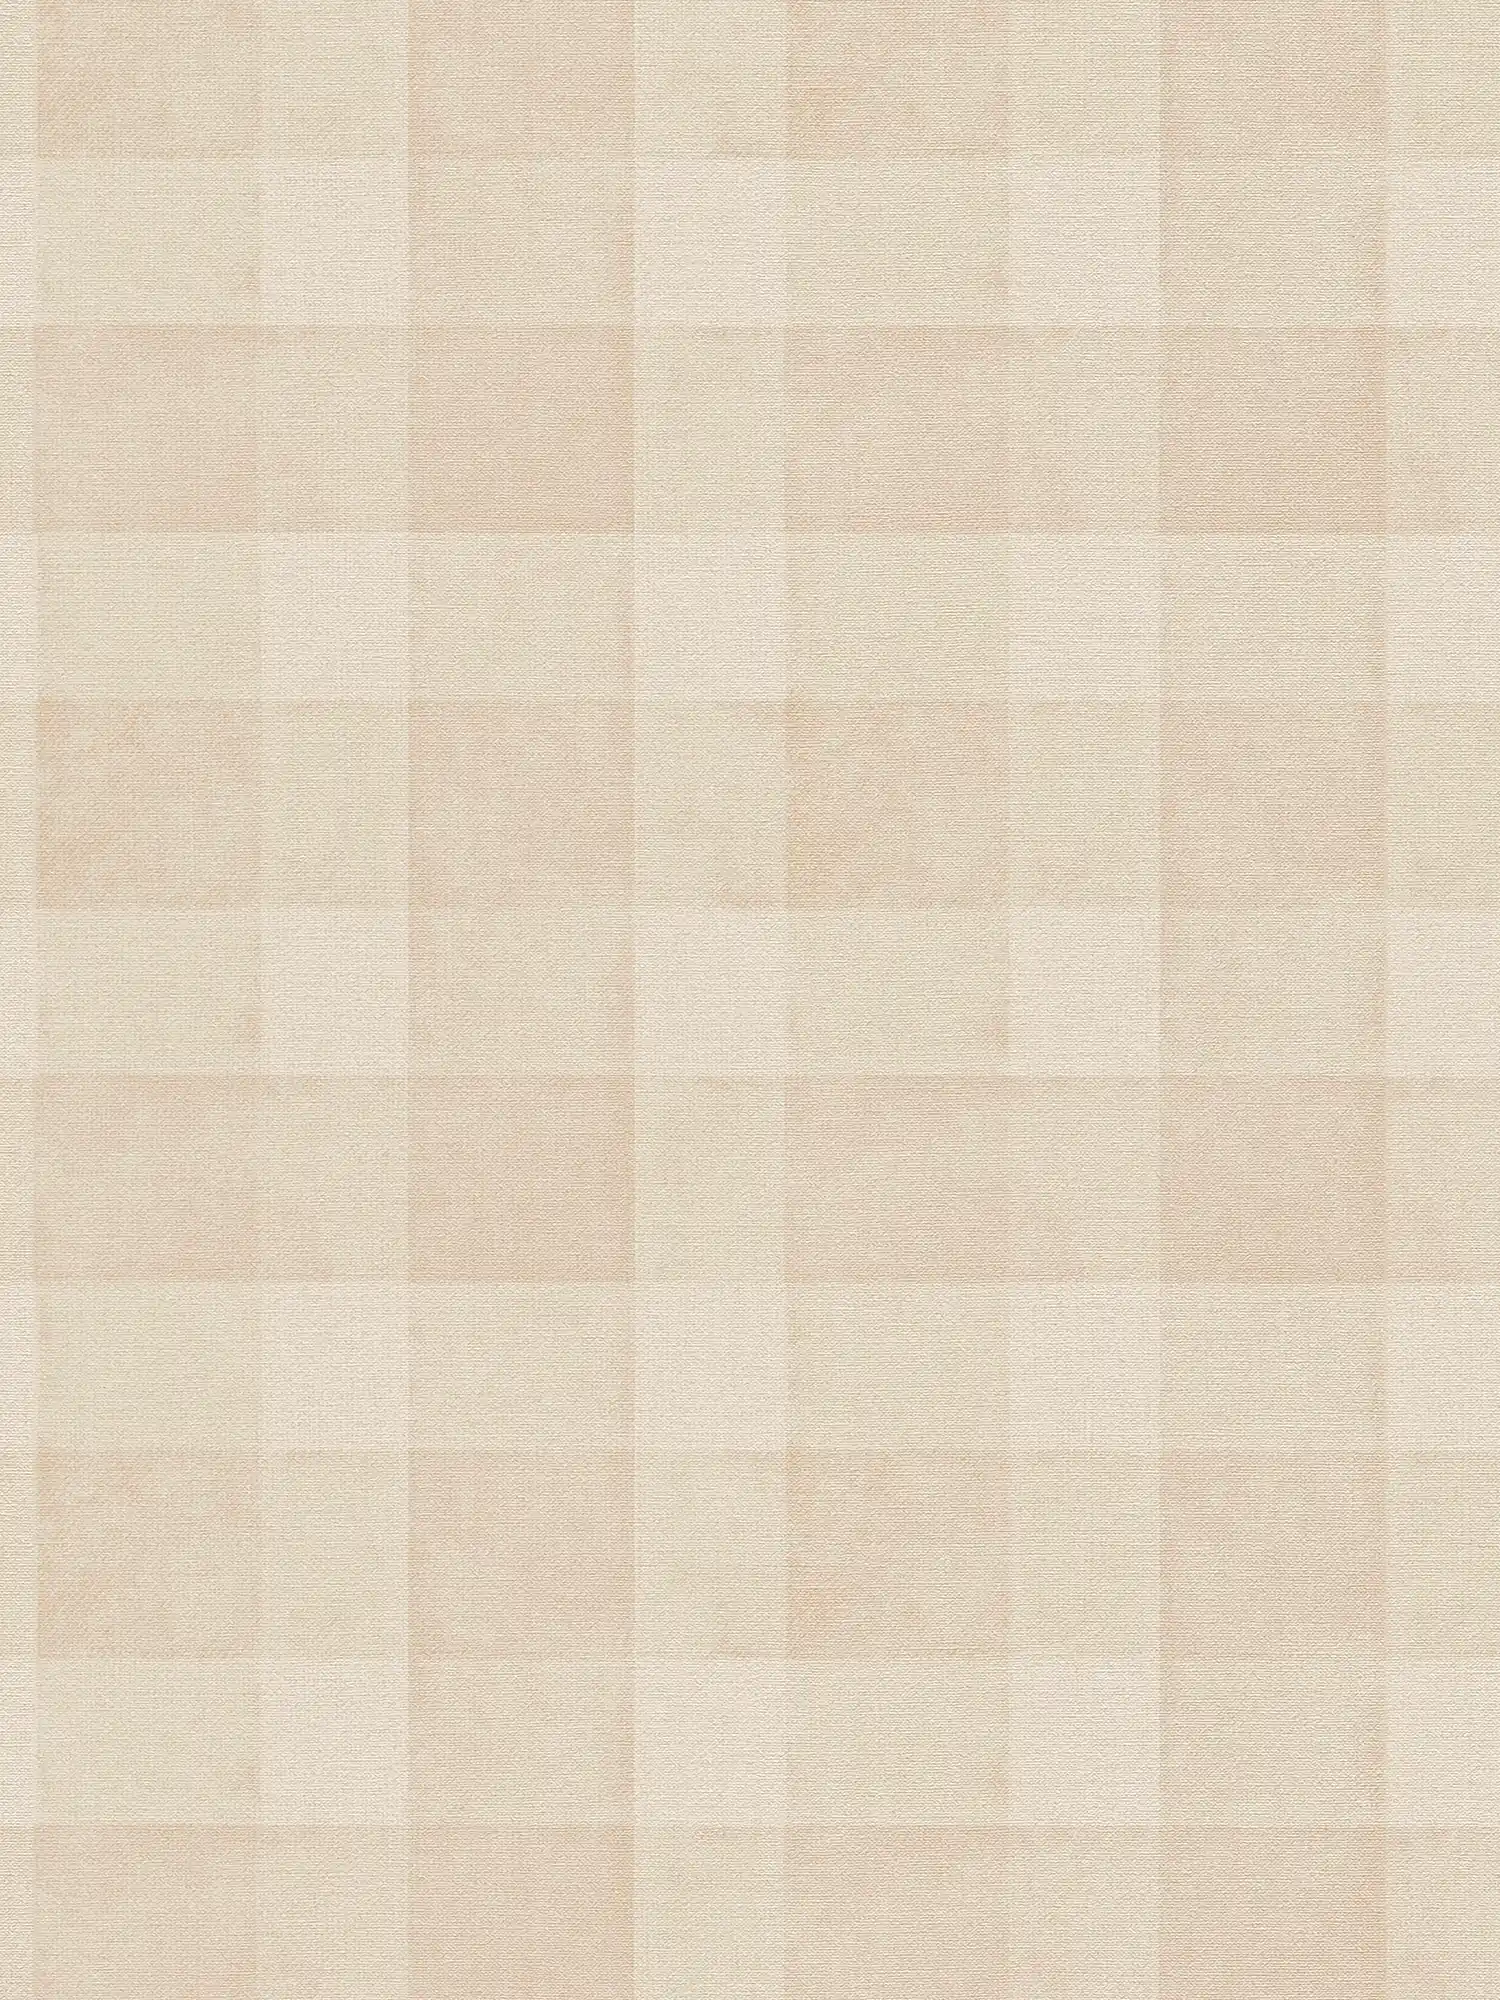 Non-woven wallpaper PVC-free check pattern with linen look - beige
